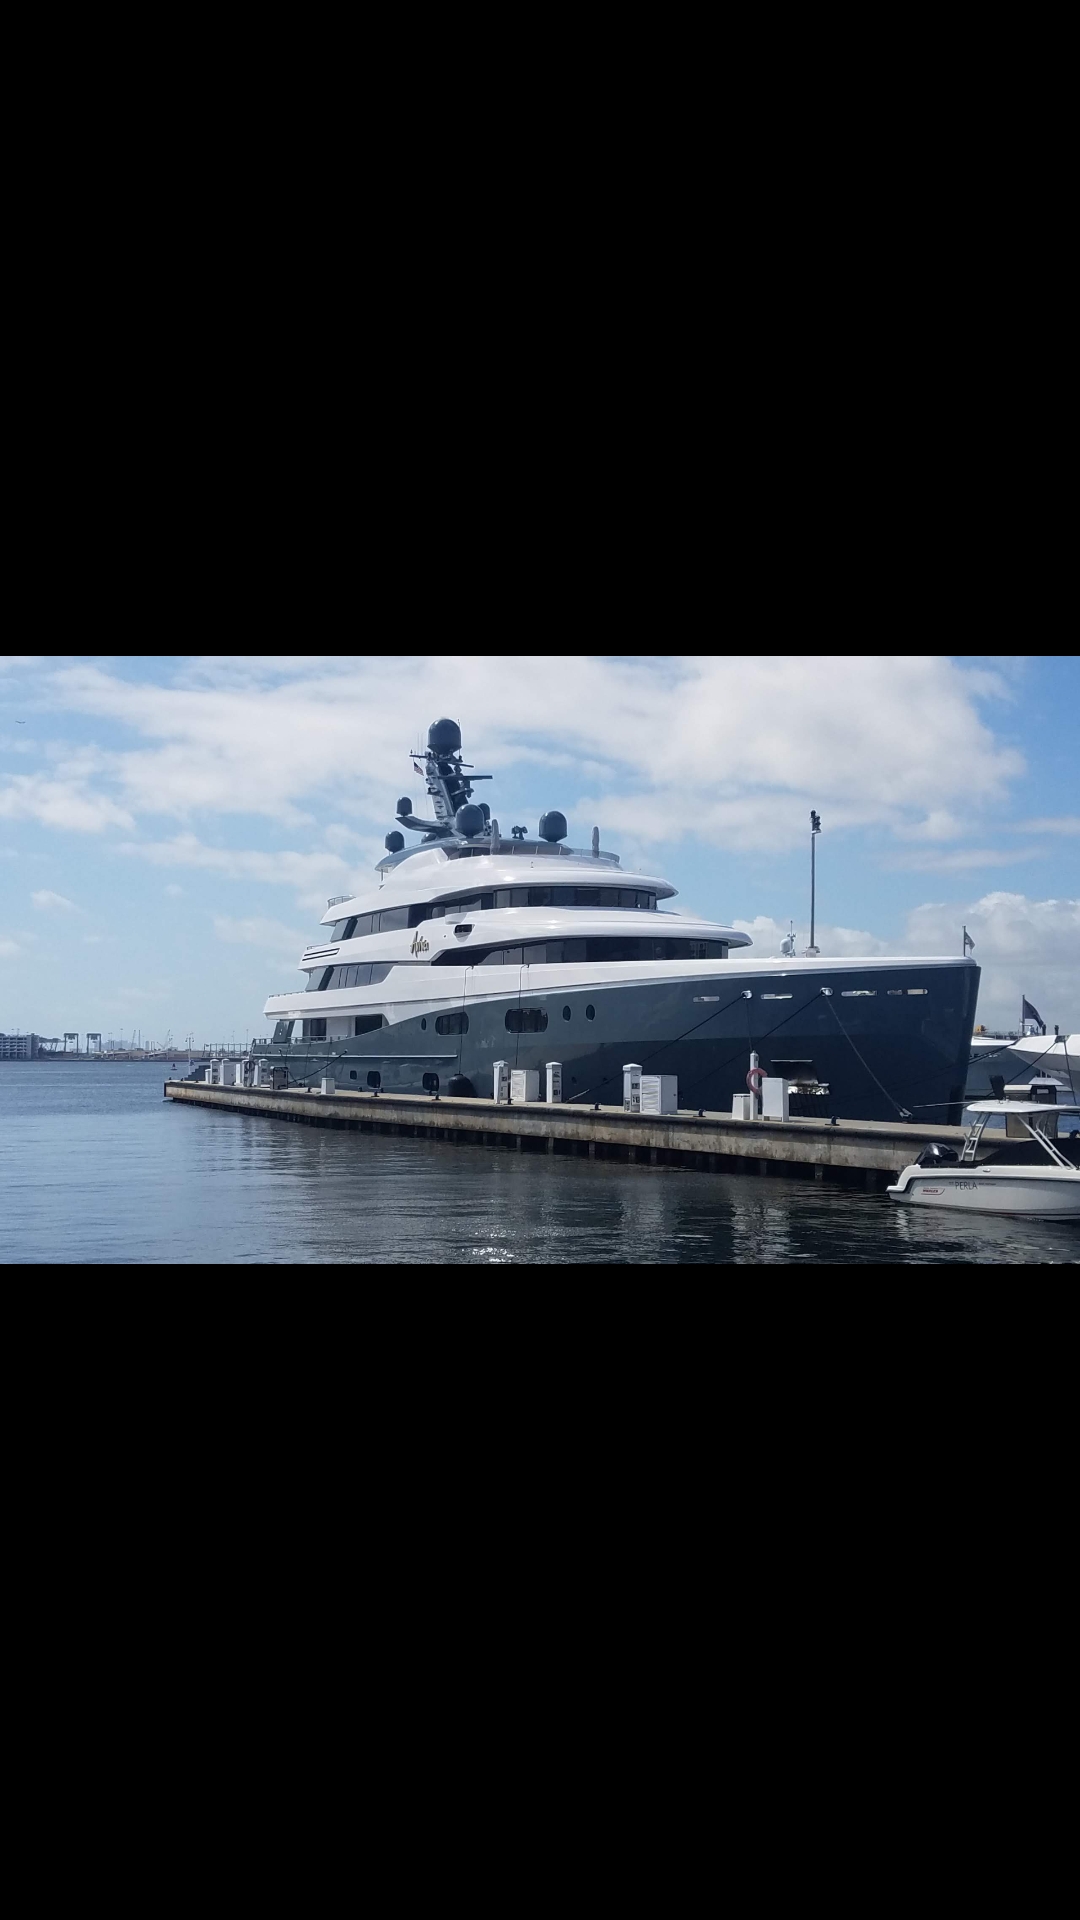 Omega Yacht - Yacht cleaning and detailing